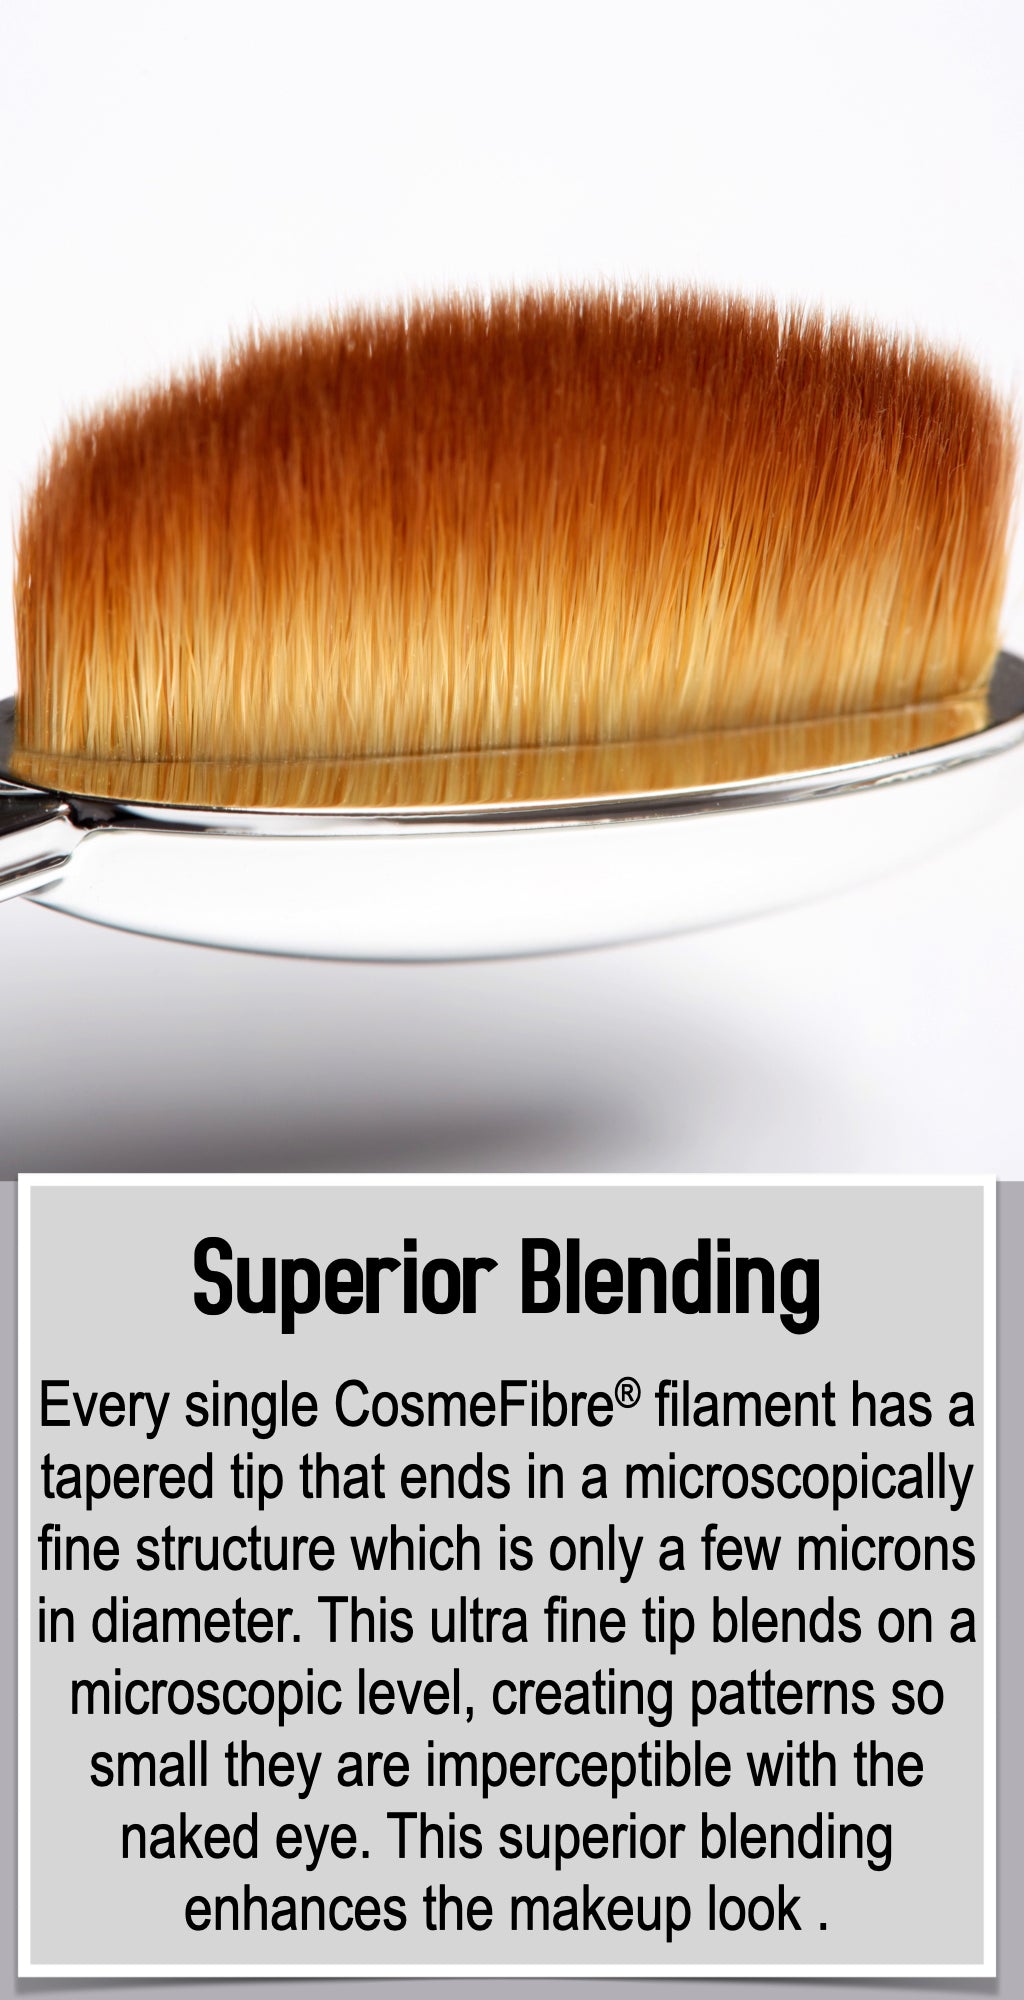 Every single CosmeFibre® filament has a tapered tip that ends in a microscopically fine structure which is only a few microns in diameter. This ultra fine tip blends on a microscopic level, creating patterns so small they are imperceptible with the naked eye. This superior blending enhances the makeup look .